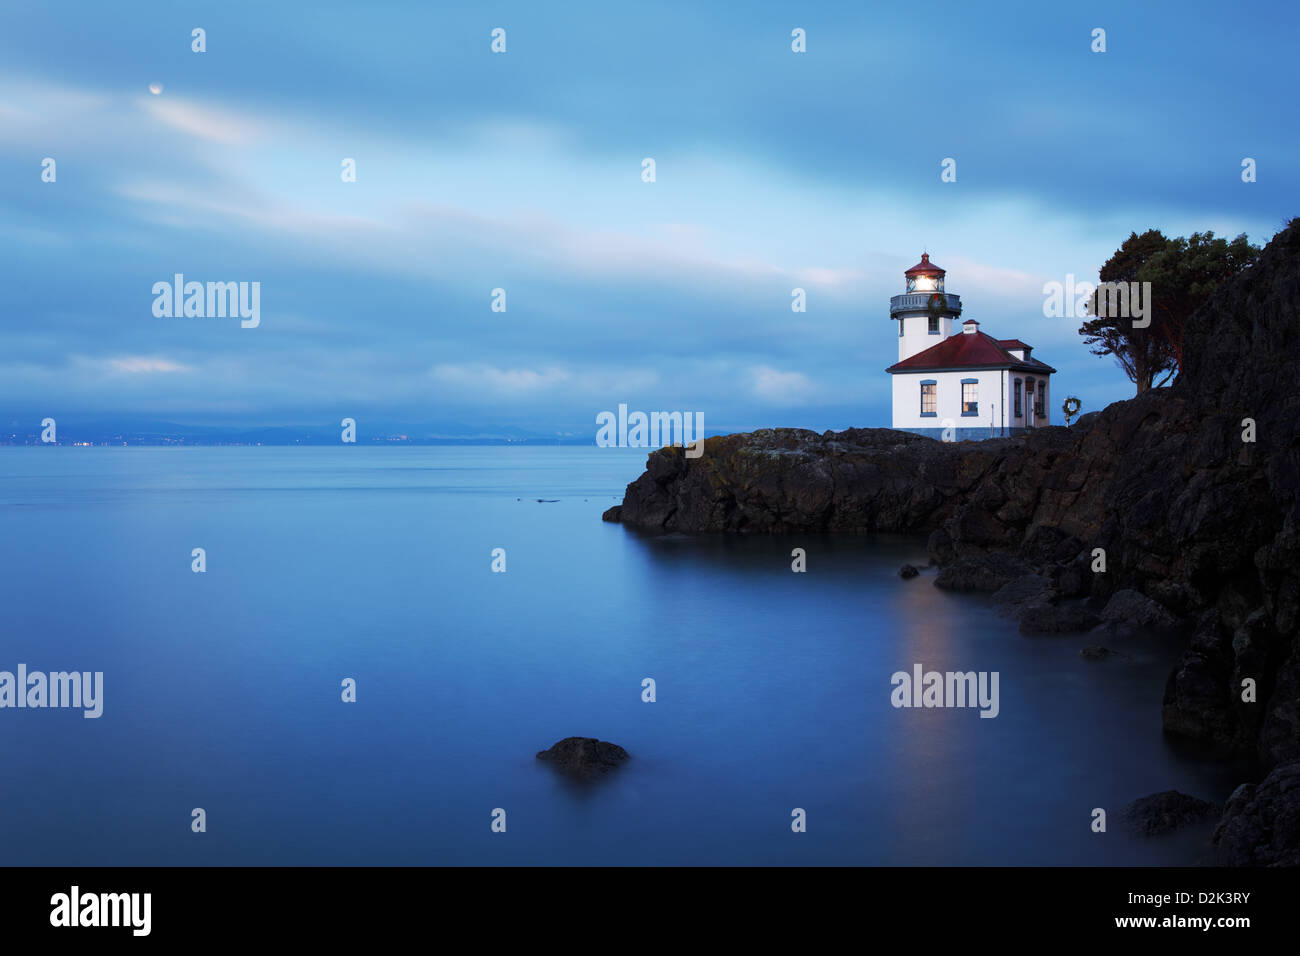 Lime Kiln Lighthouse stands watch over Haro Strait at dawn, Washington Stock Photo